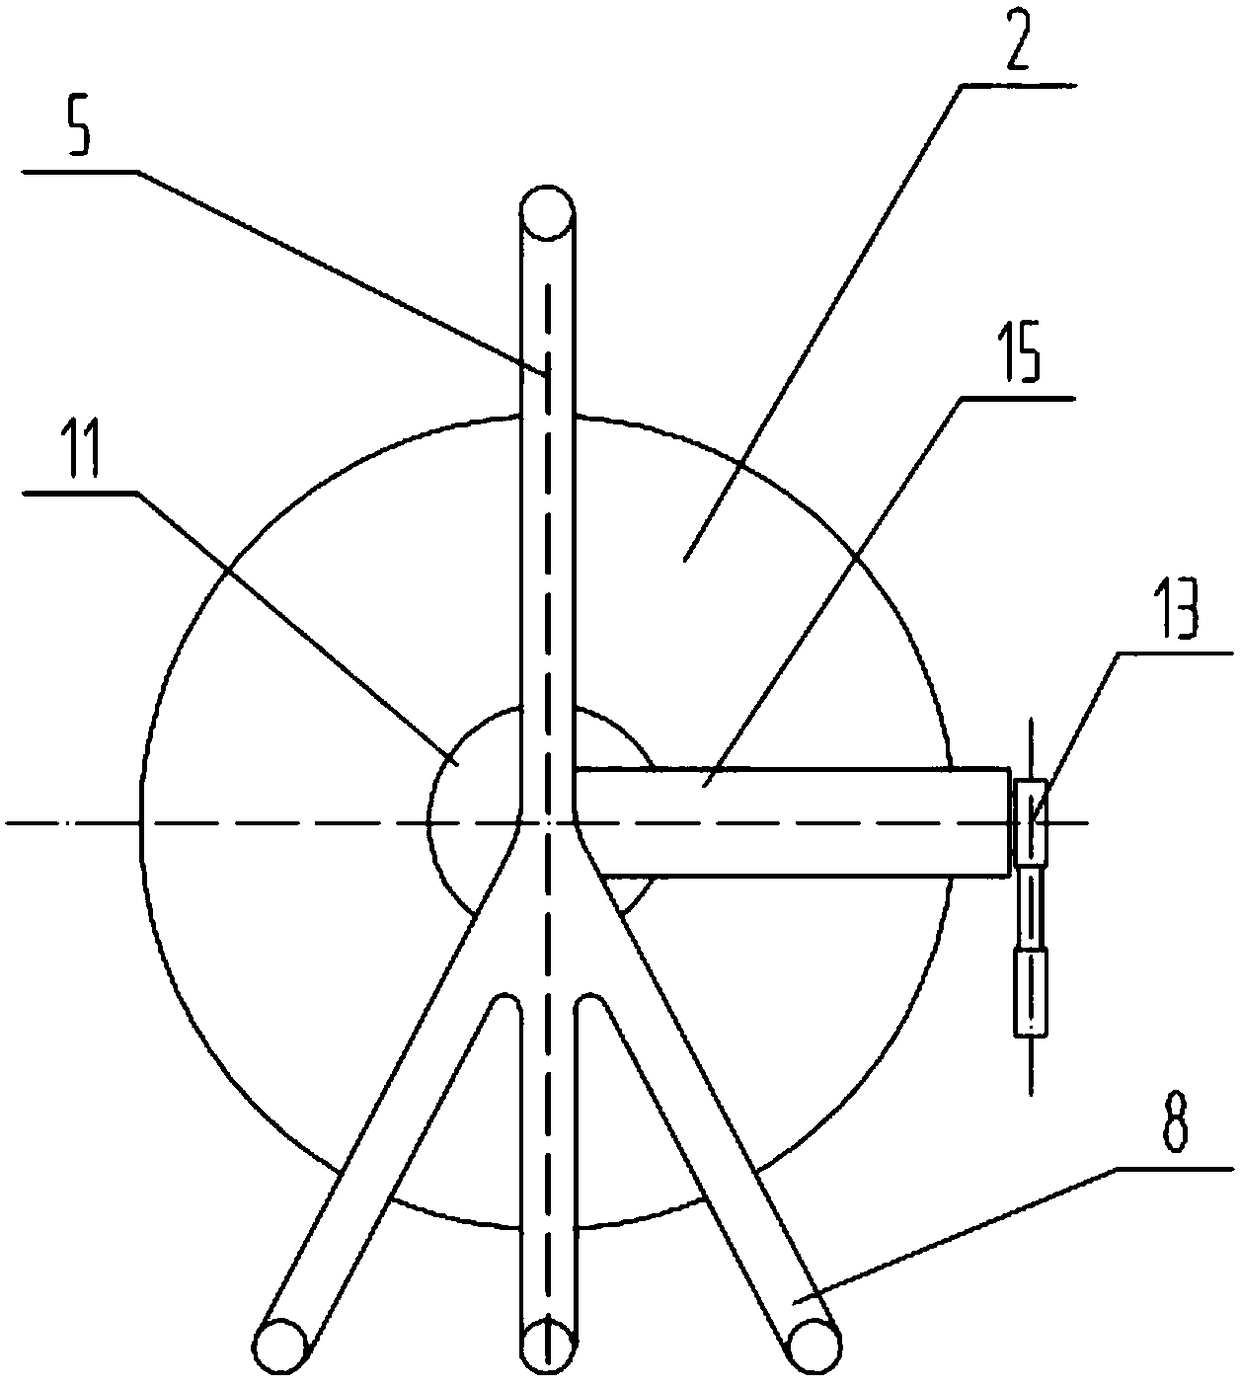 A grounding cable winding device